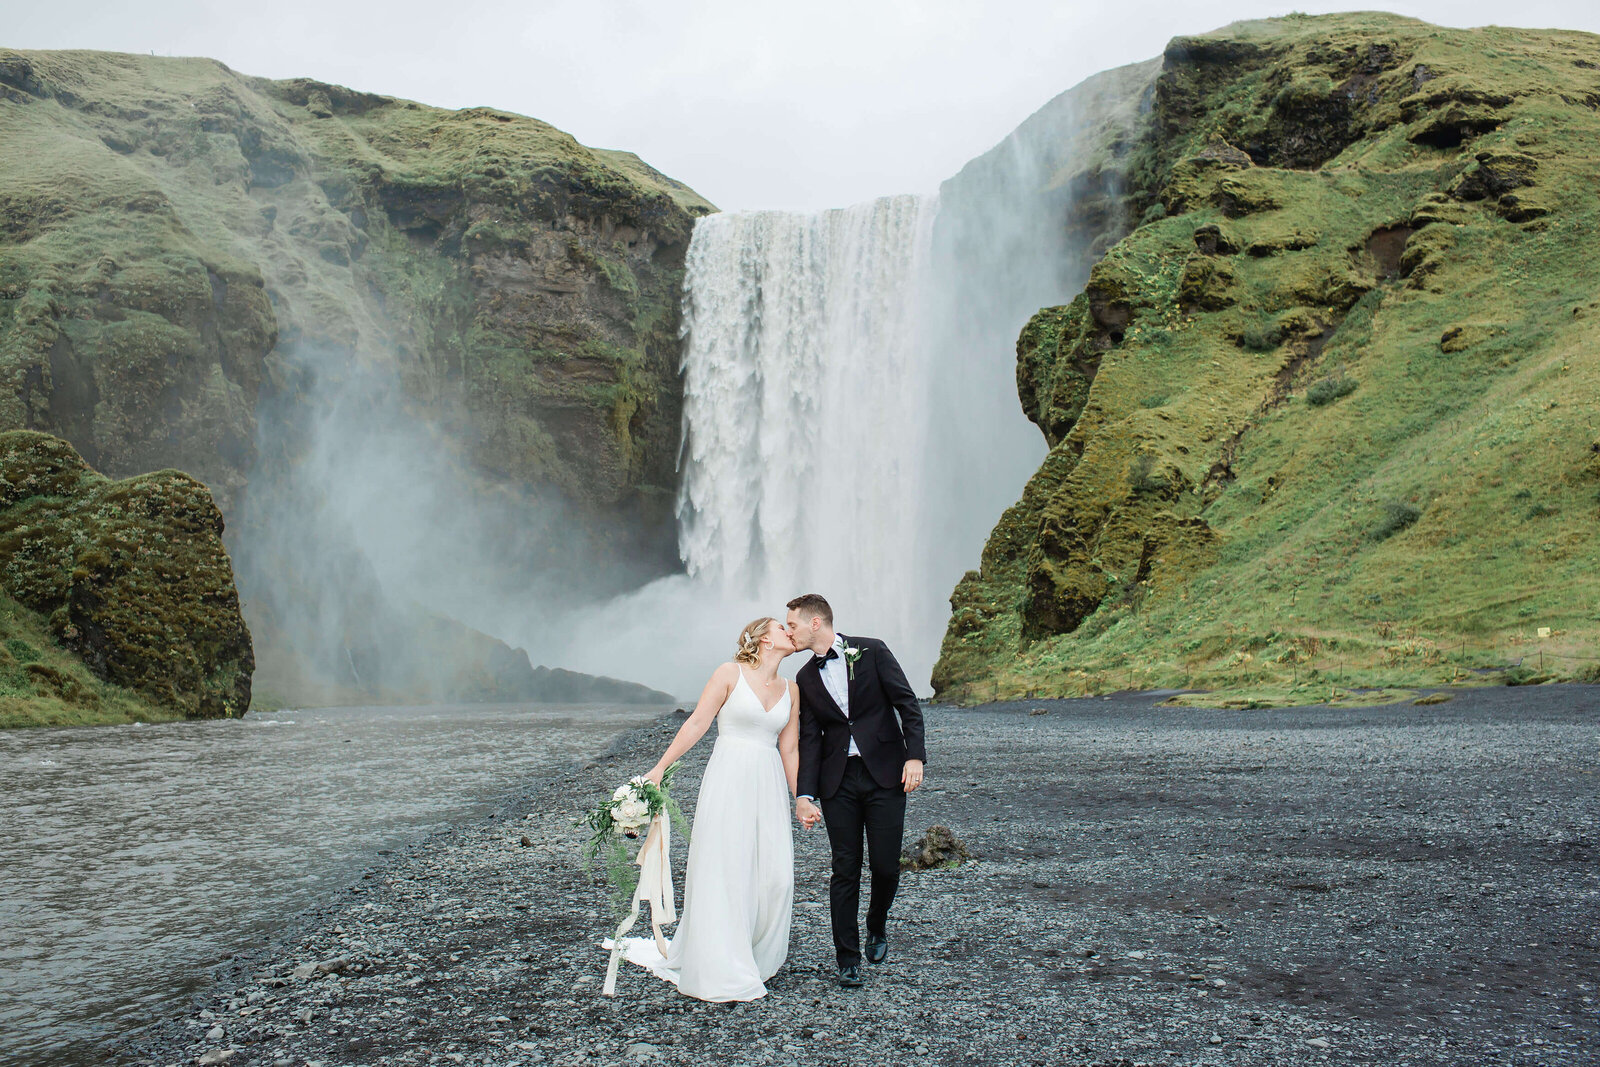 Michael and Nicole holding hands in their wedding attire in front of Skogafoss waterfall in Iceland during their elopement 